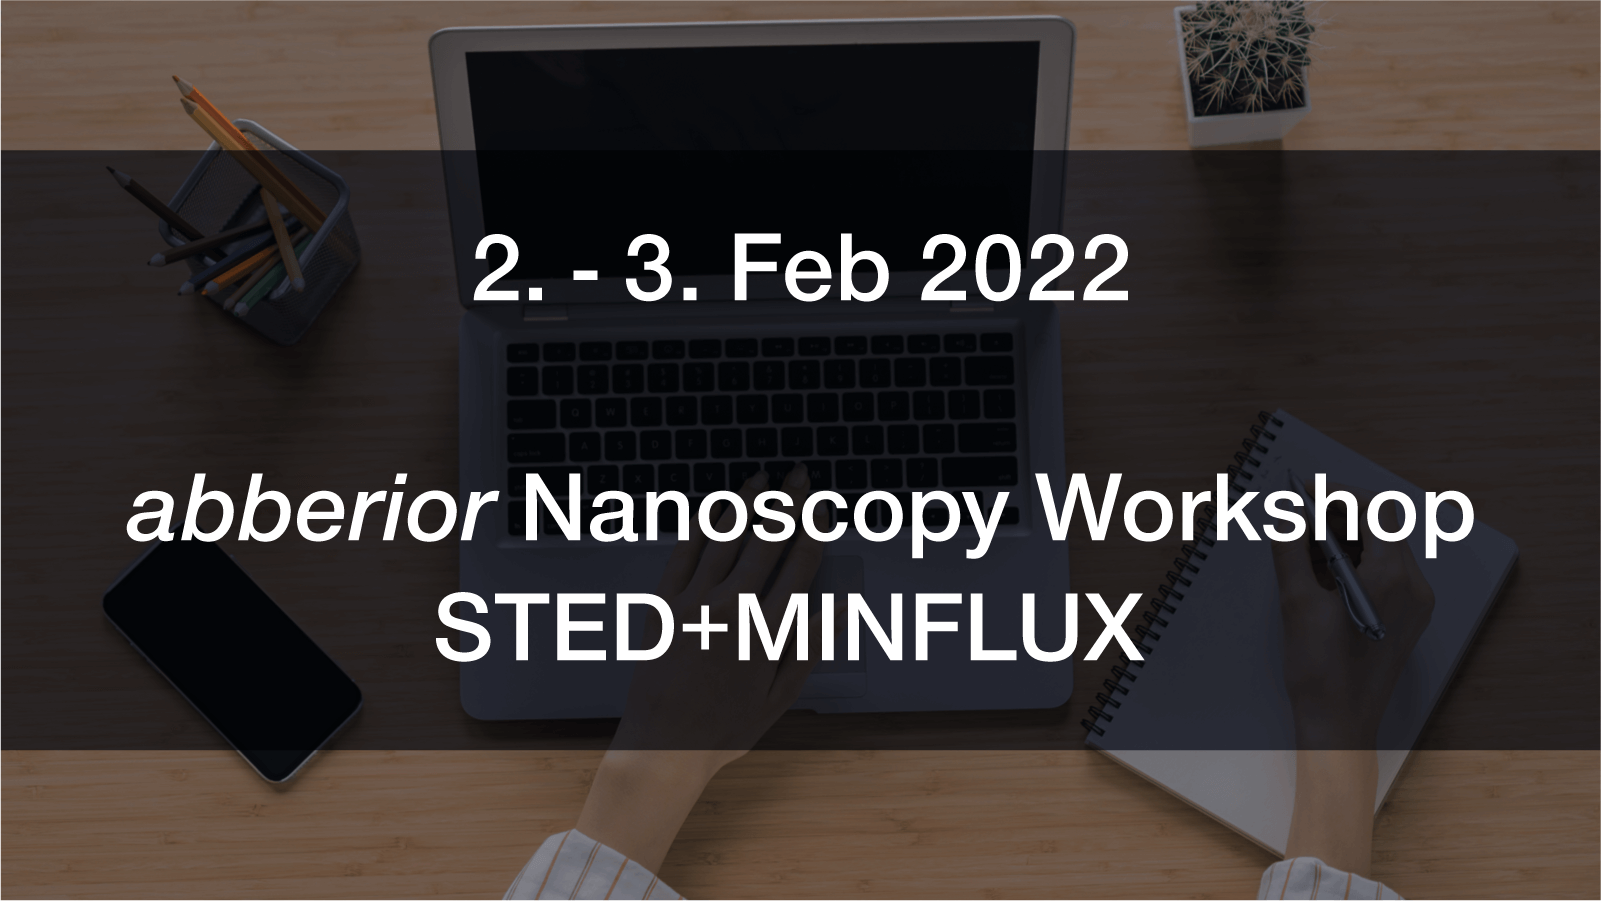 Join abberior's nanoscopy workshop all about STED and MINFLUX